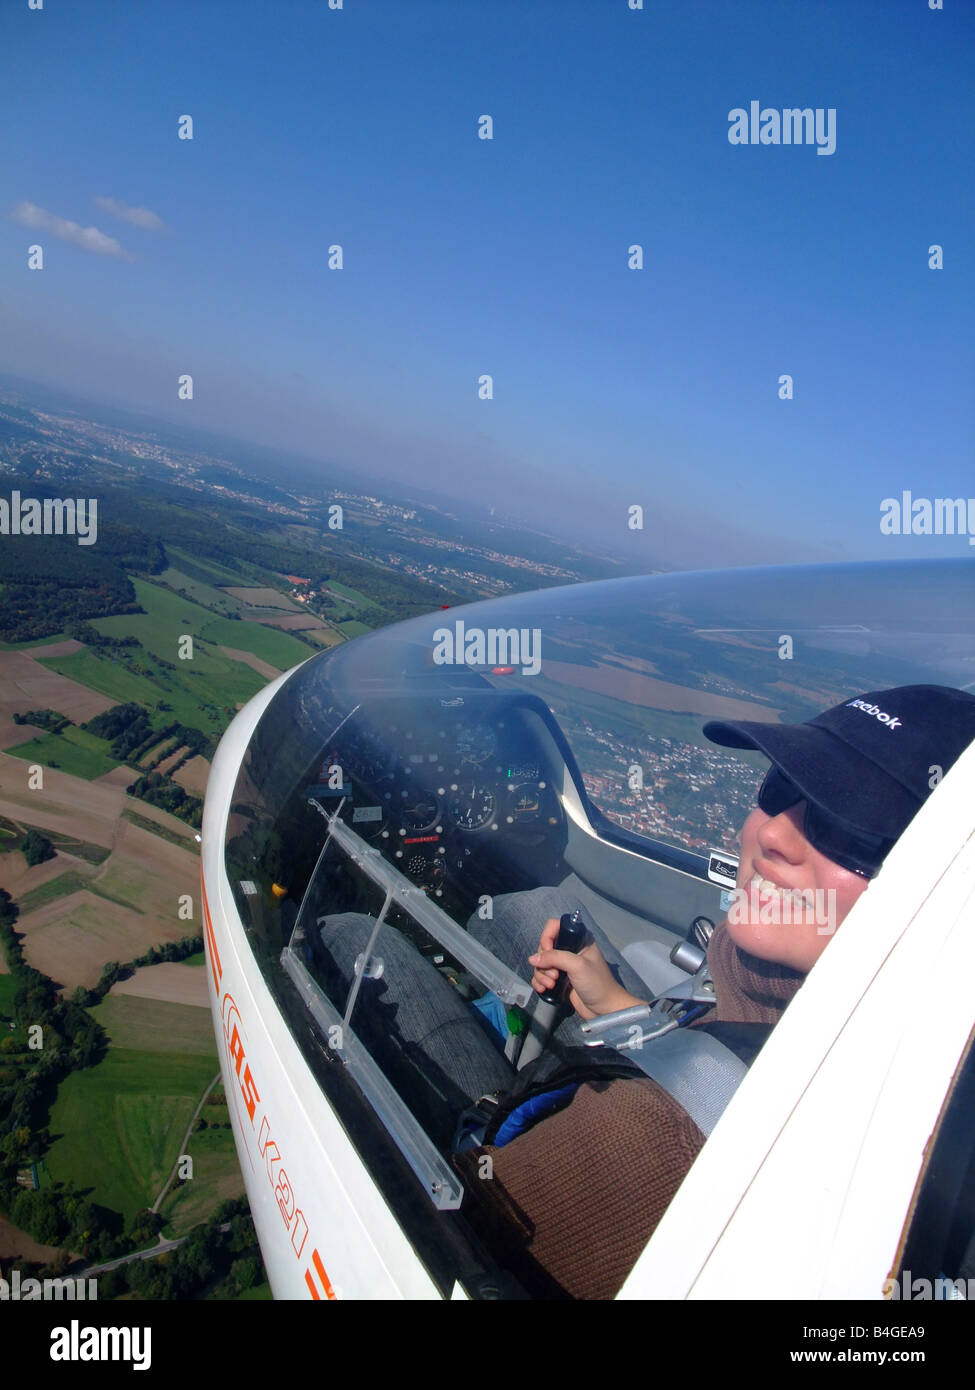 A young woman glider pilot outside view during the flight – Glider model ASK-21 - France Stock Photo